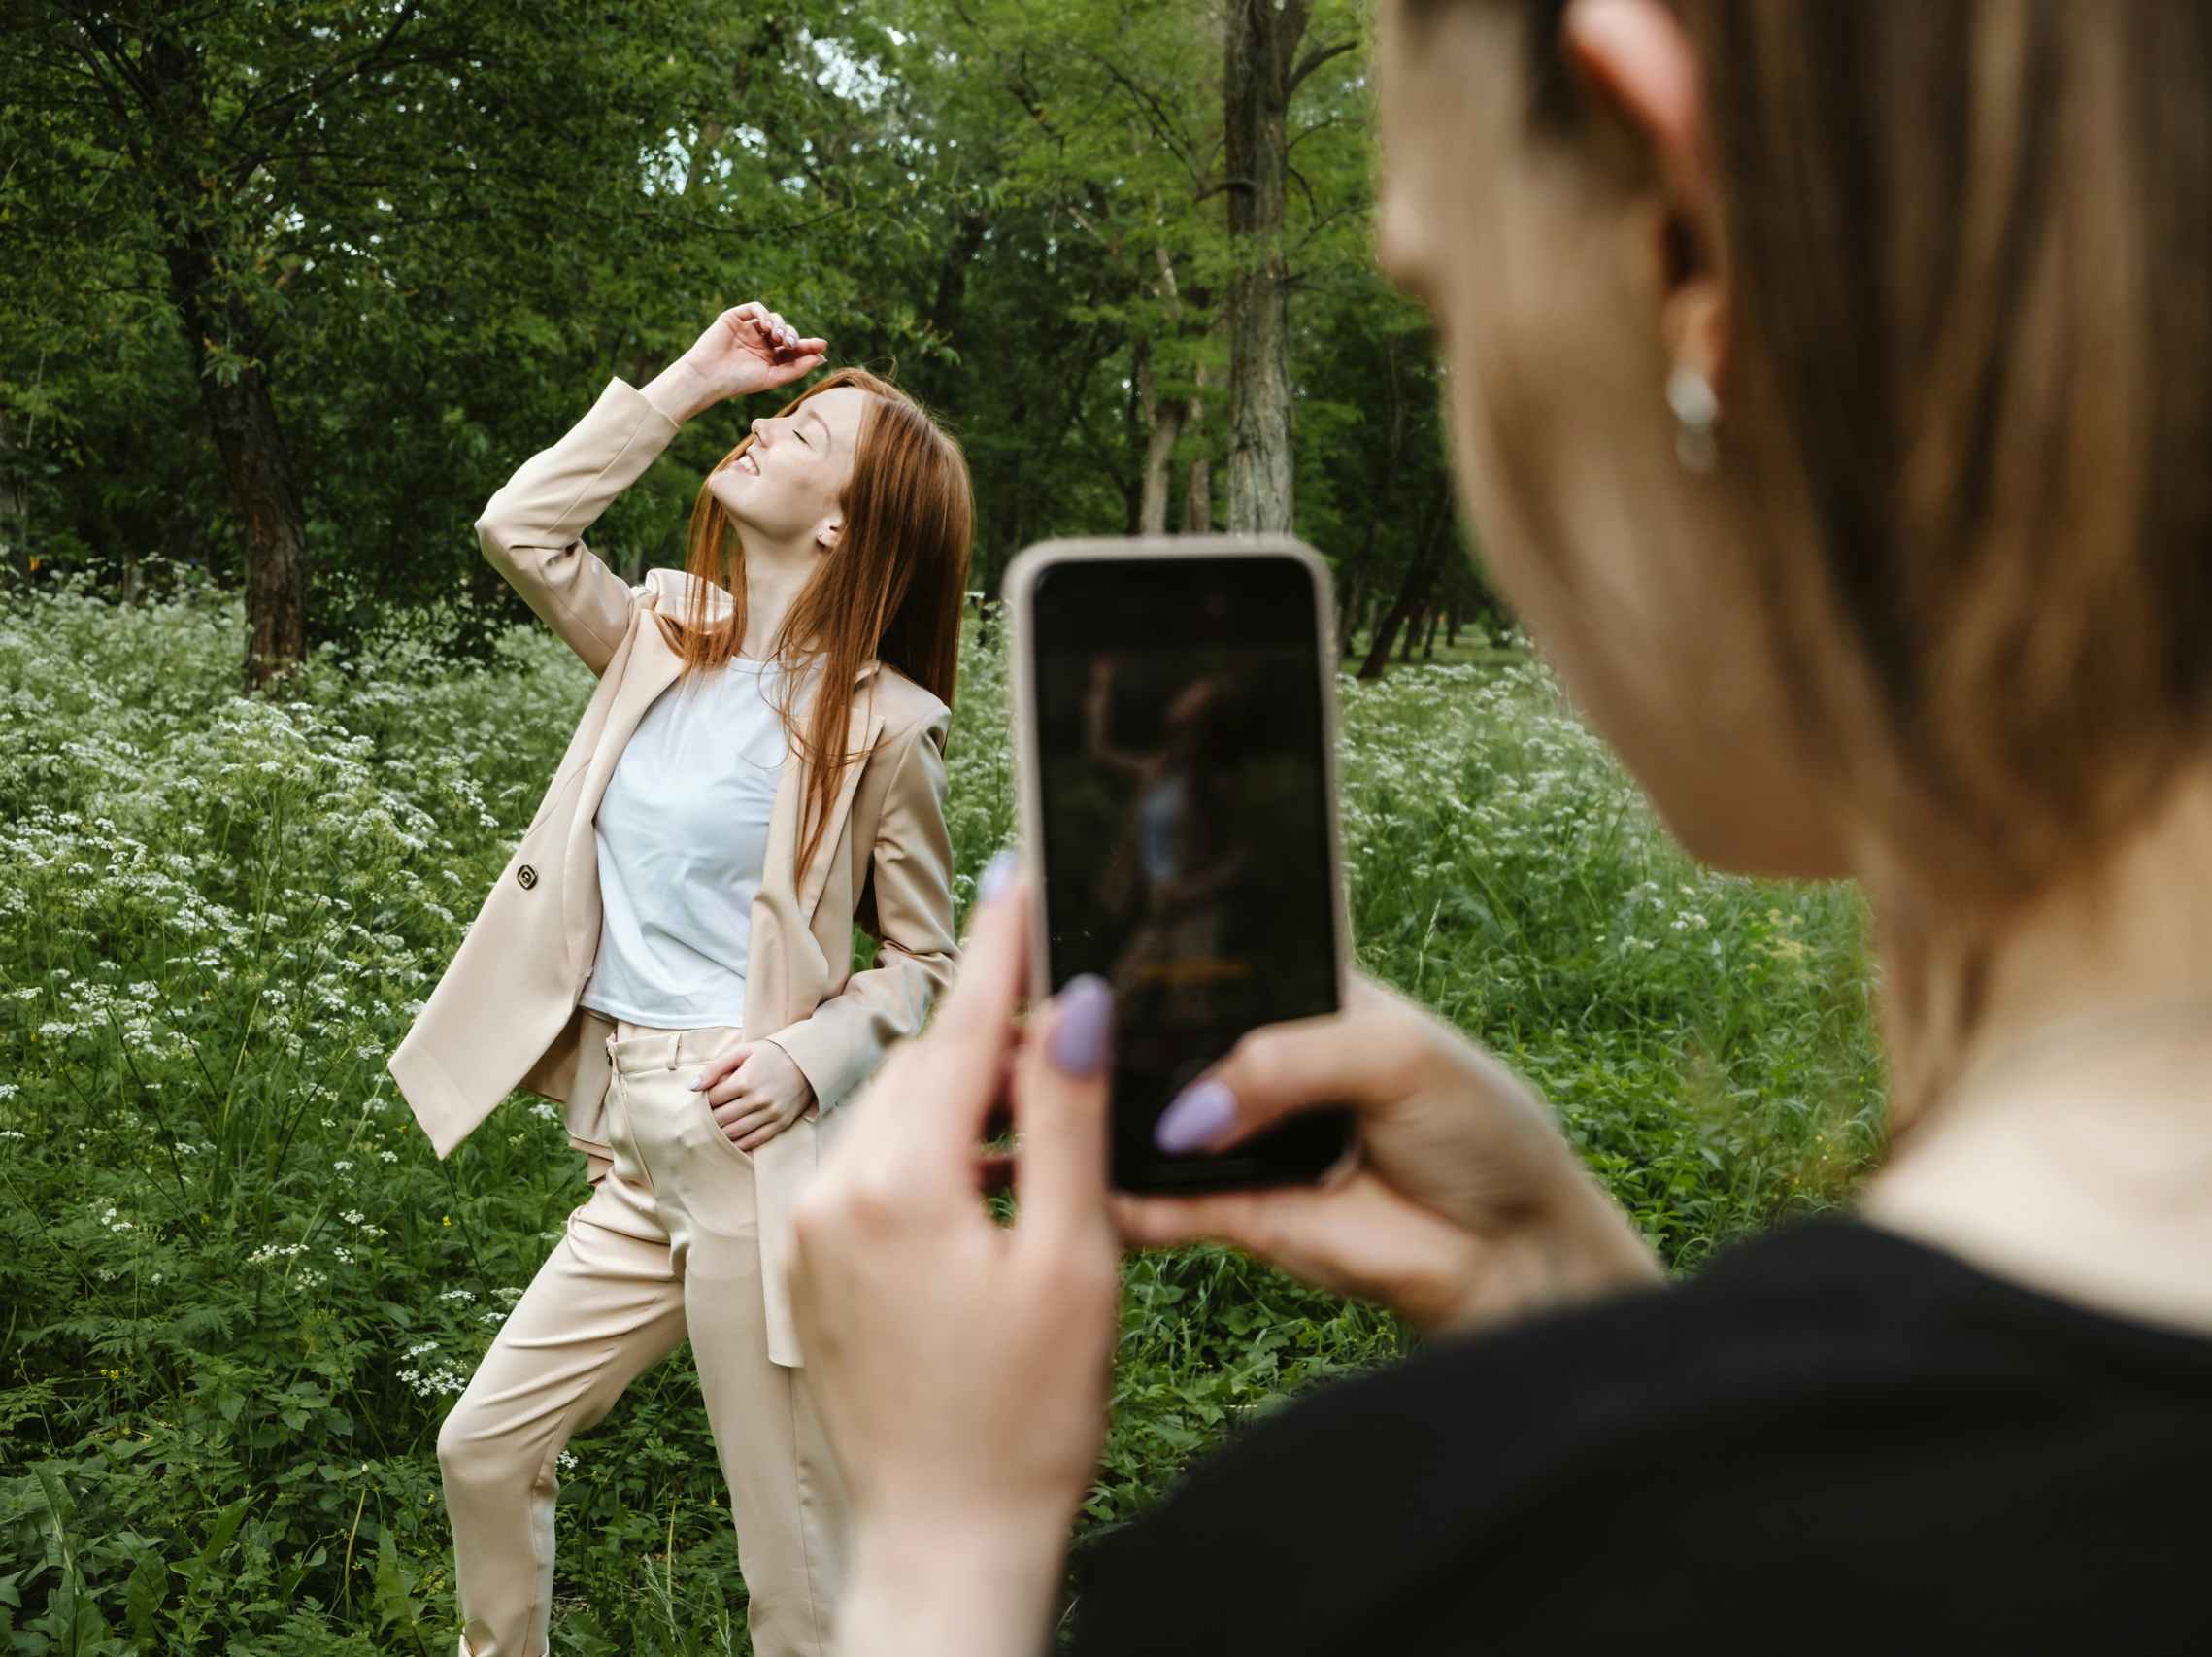 A person taking a photo of another person posing in front of some greenery